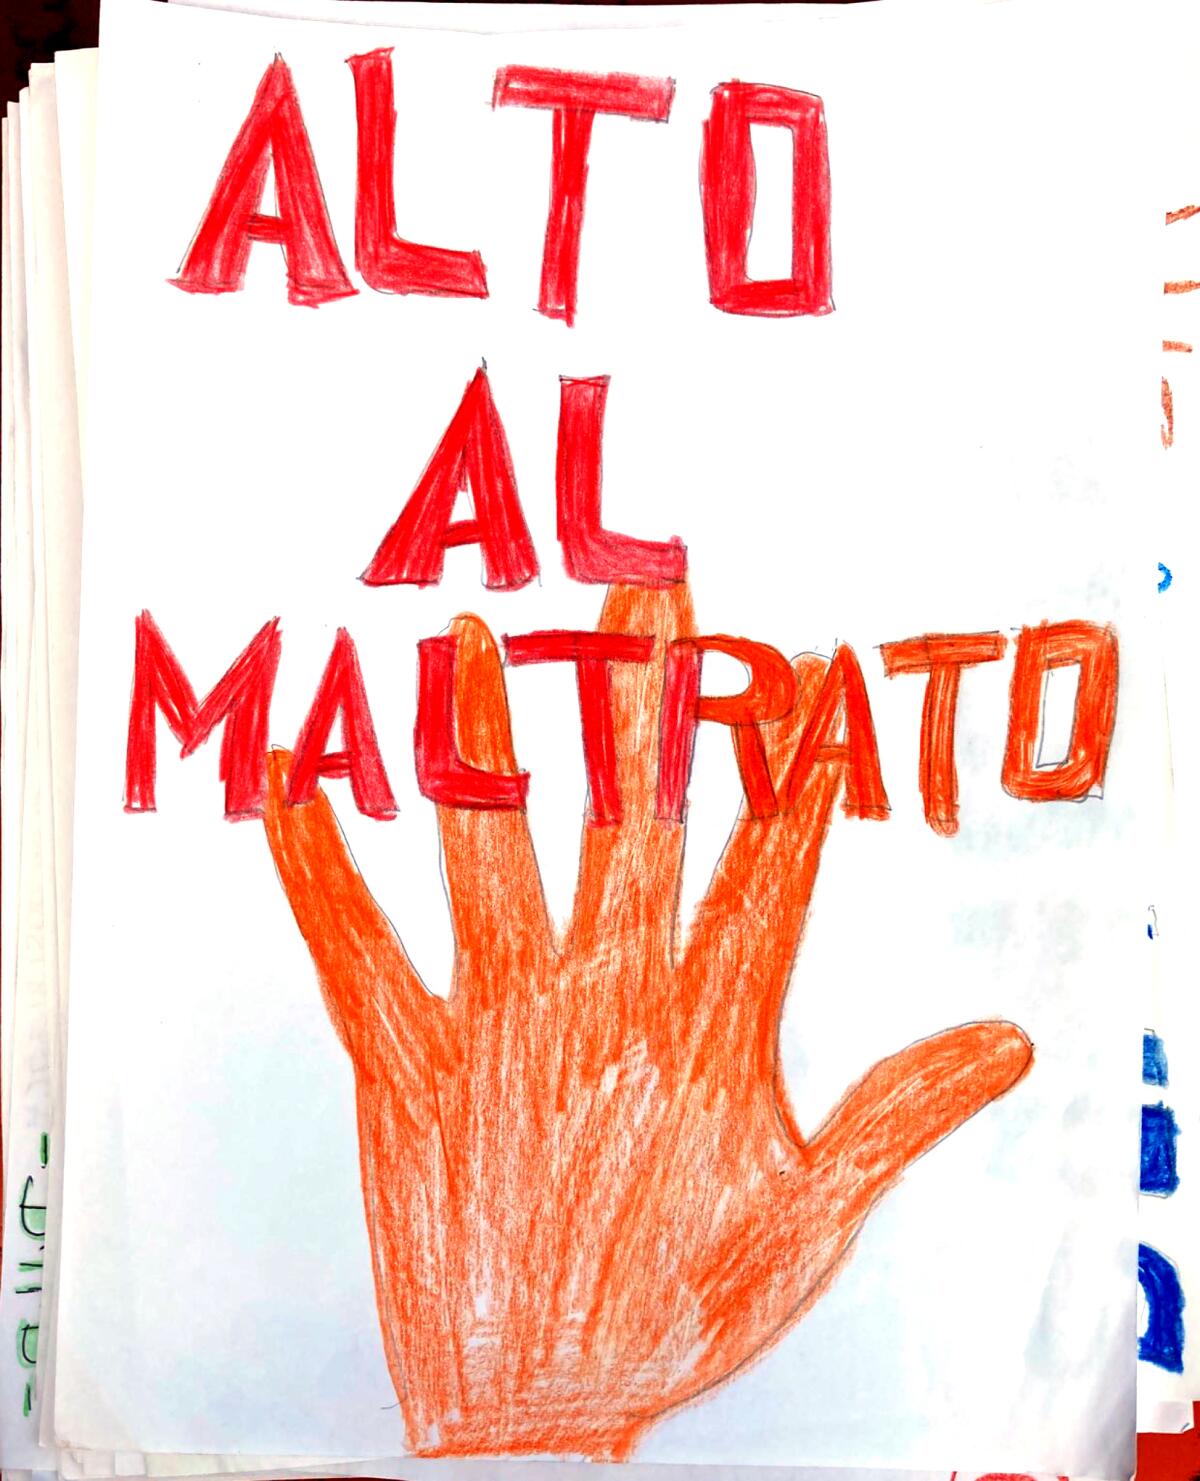 A drawing in support of the Georgia immigration detainees states in Spanish "Alto al maltrato," or "Stop the abuse."